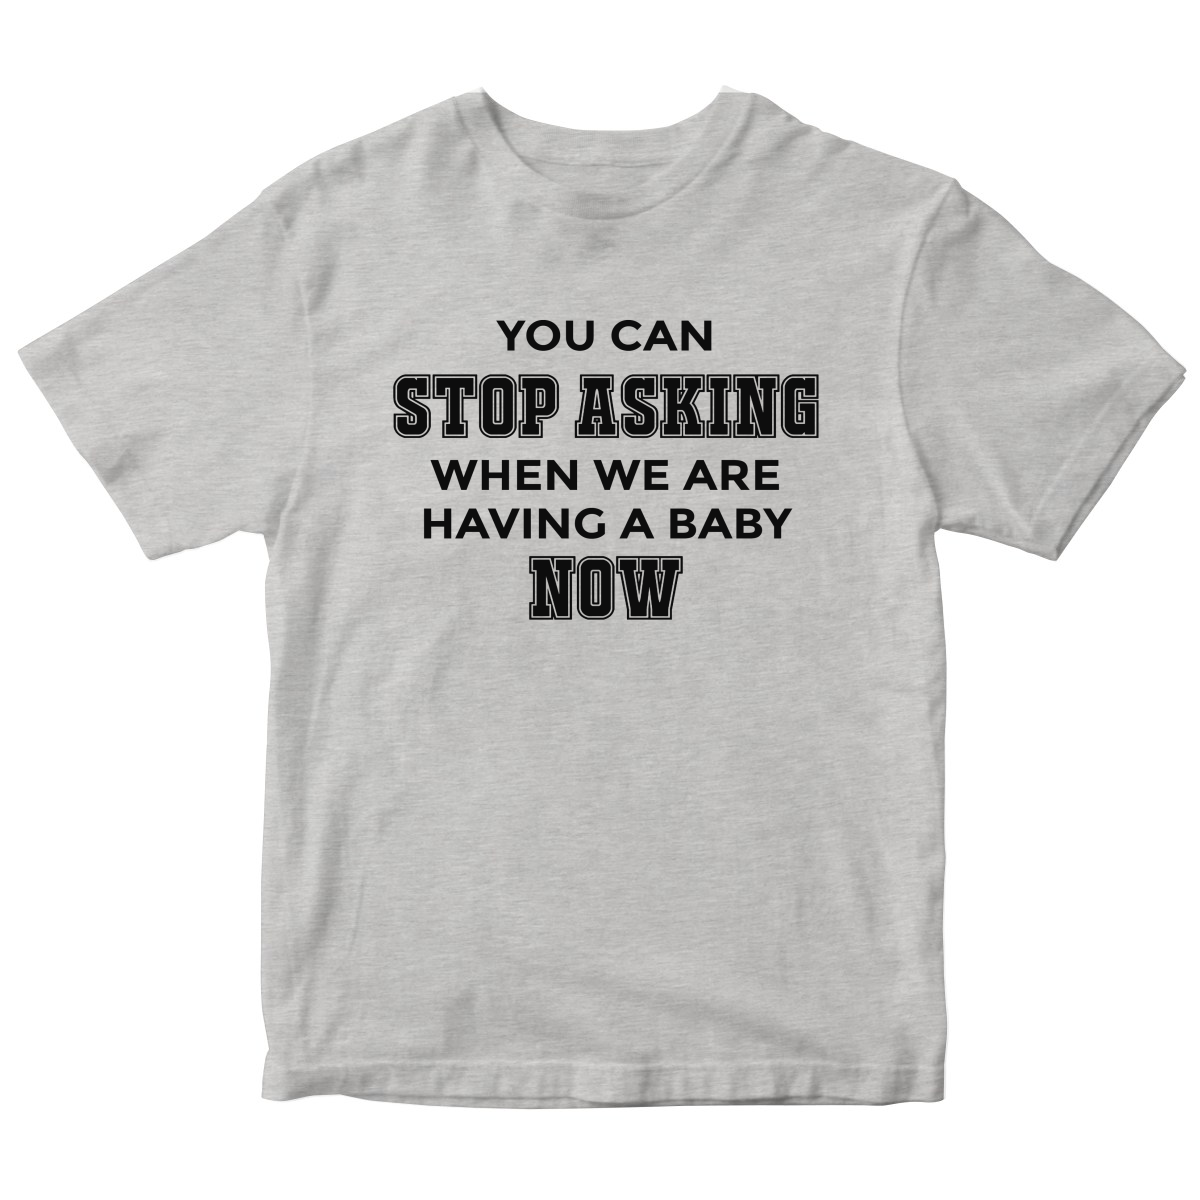 You can stop asking when we are having baby NOW Kids T-shirt | Gray